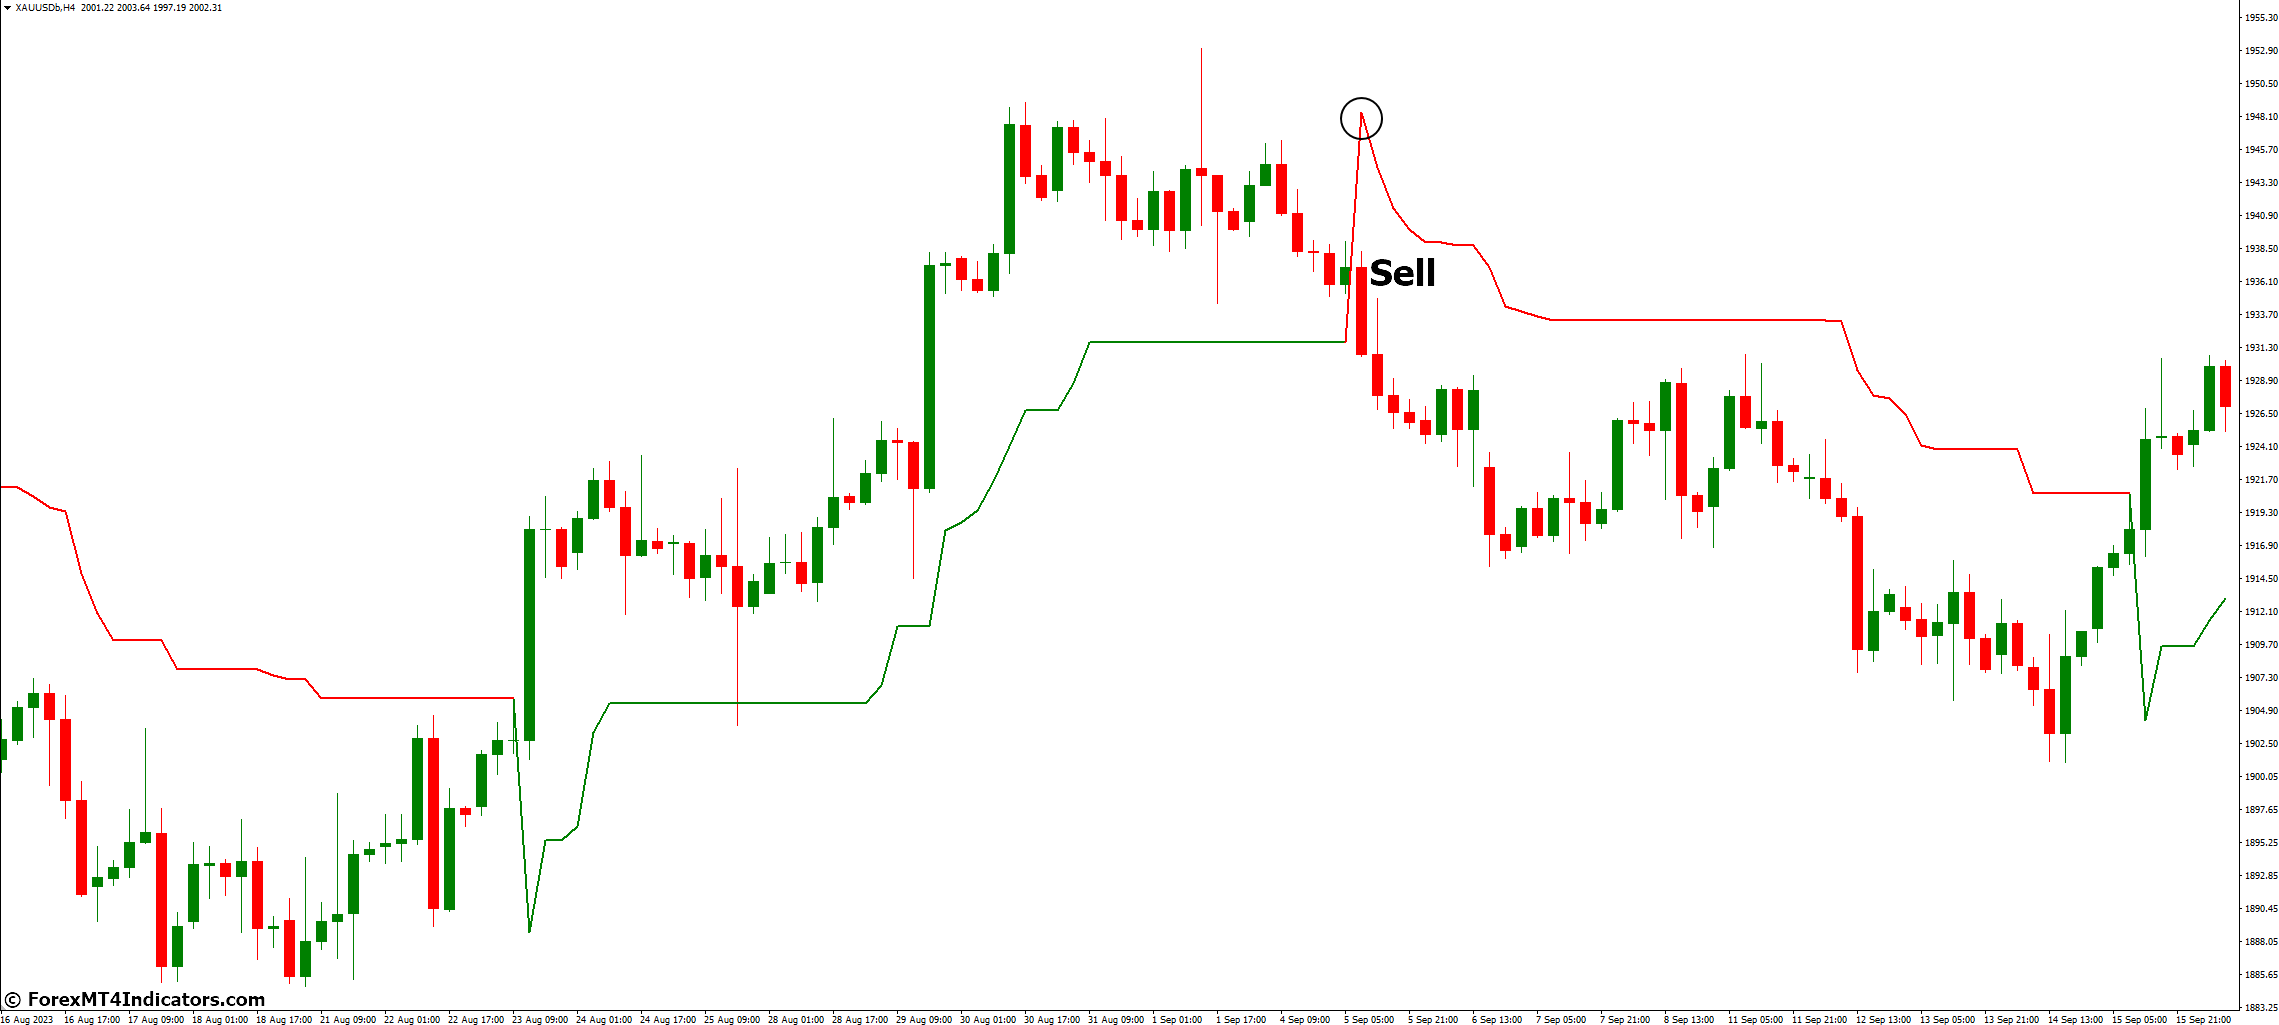 How to Trade with Kolier SuperTrend MT4 Indicator - Sell Entry